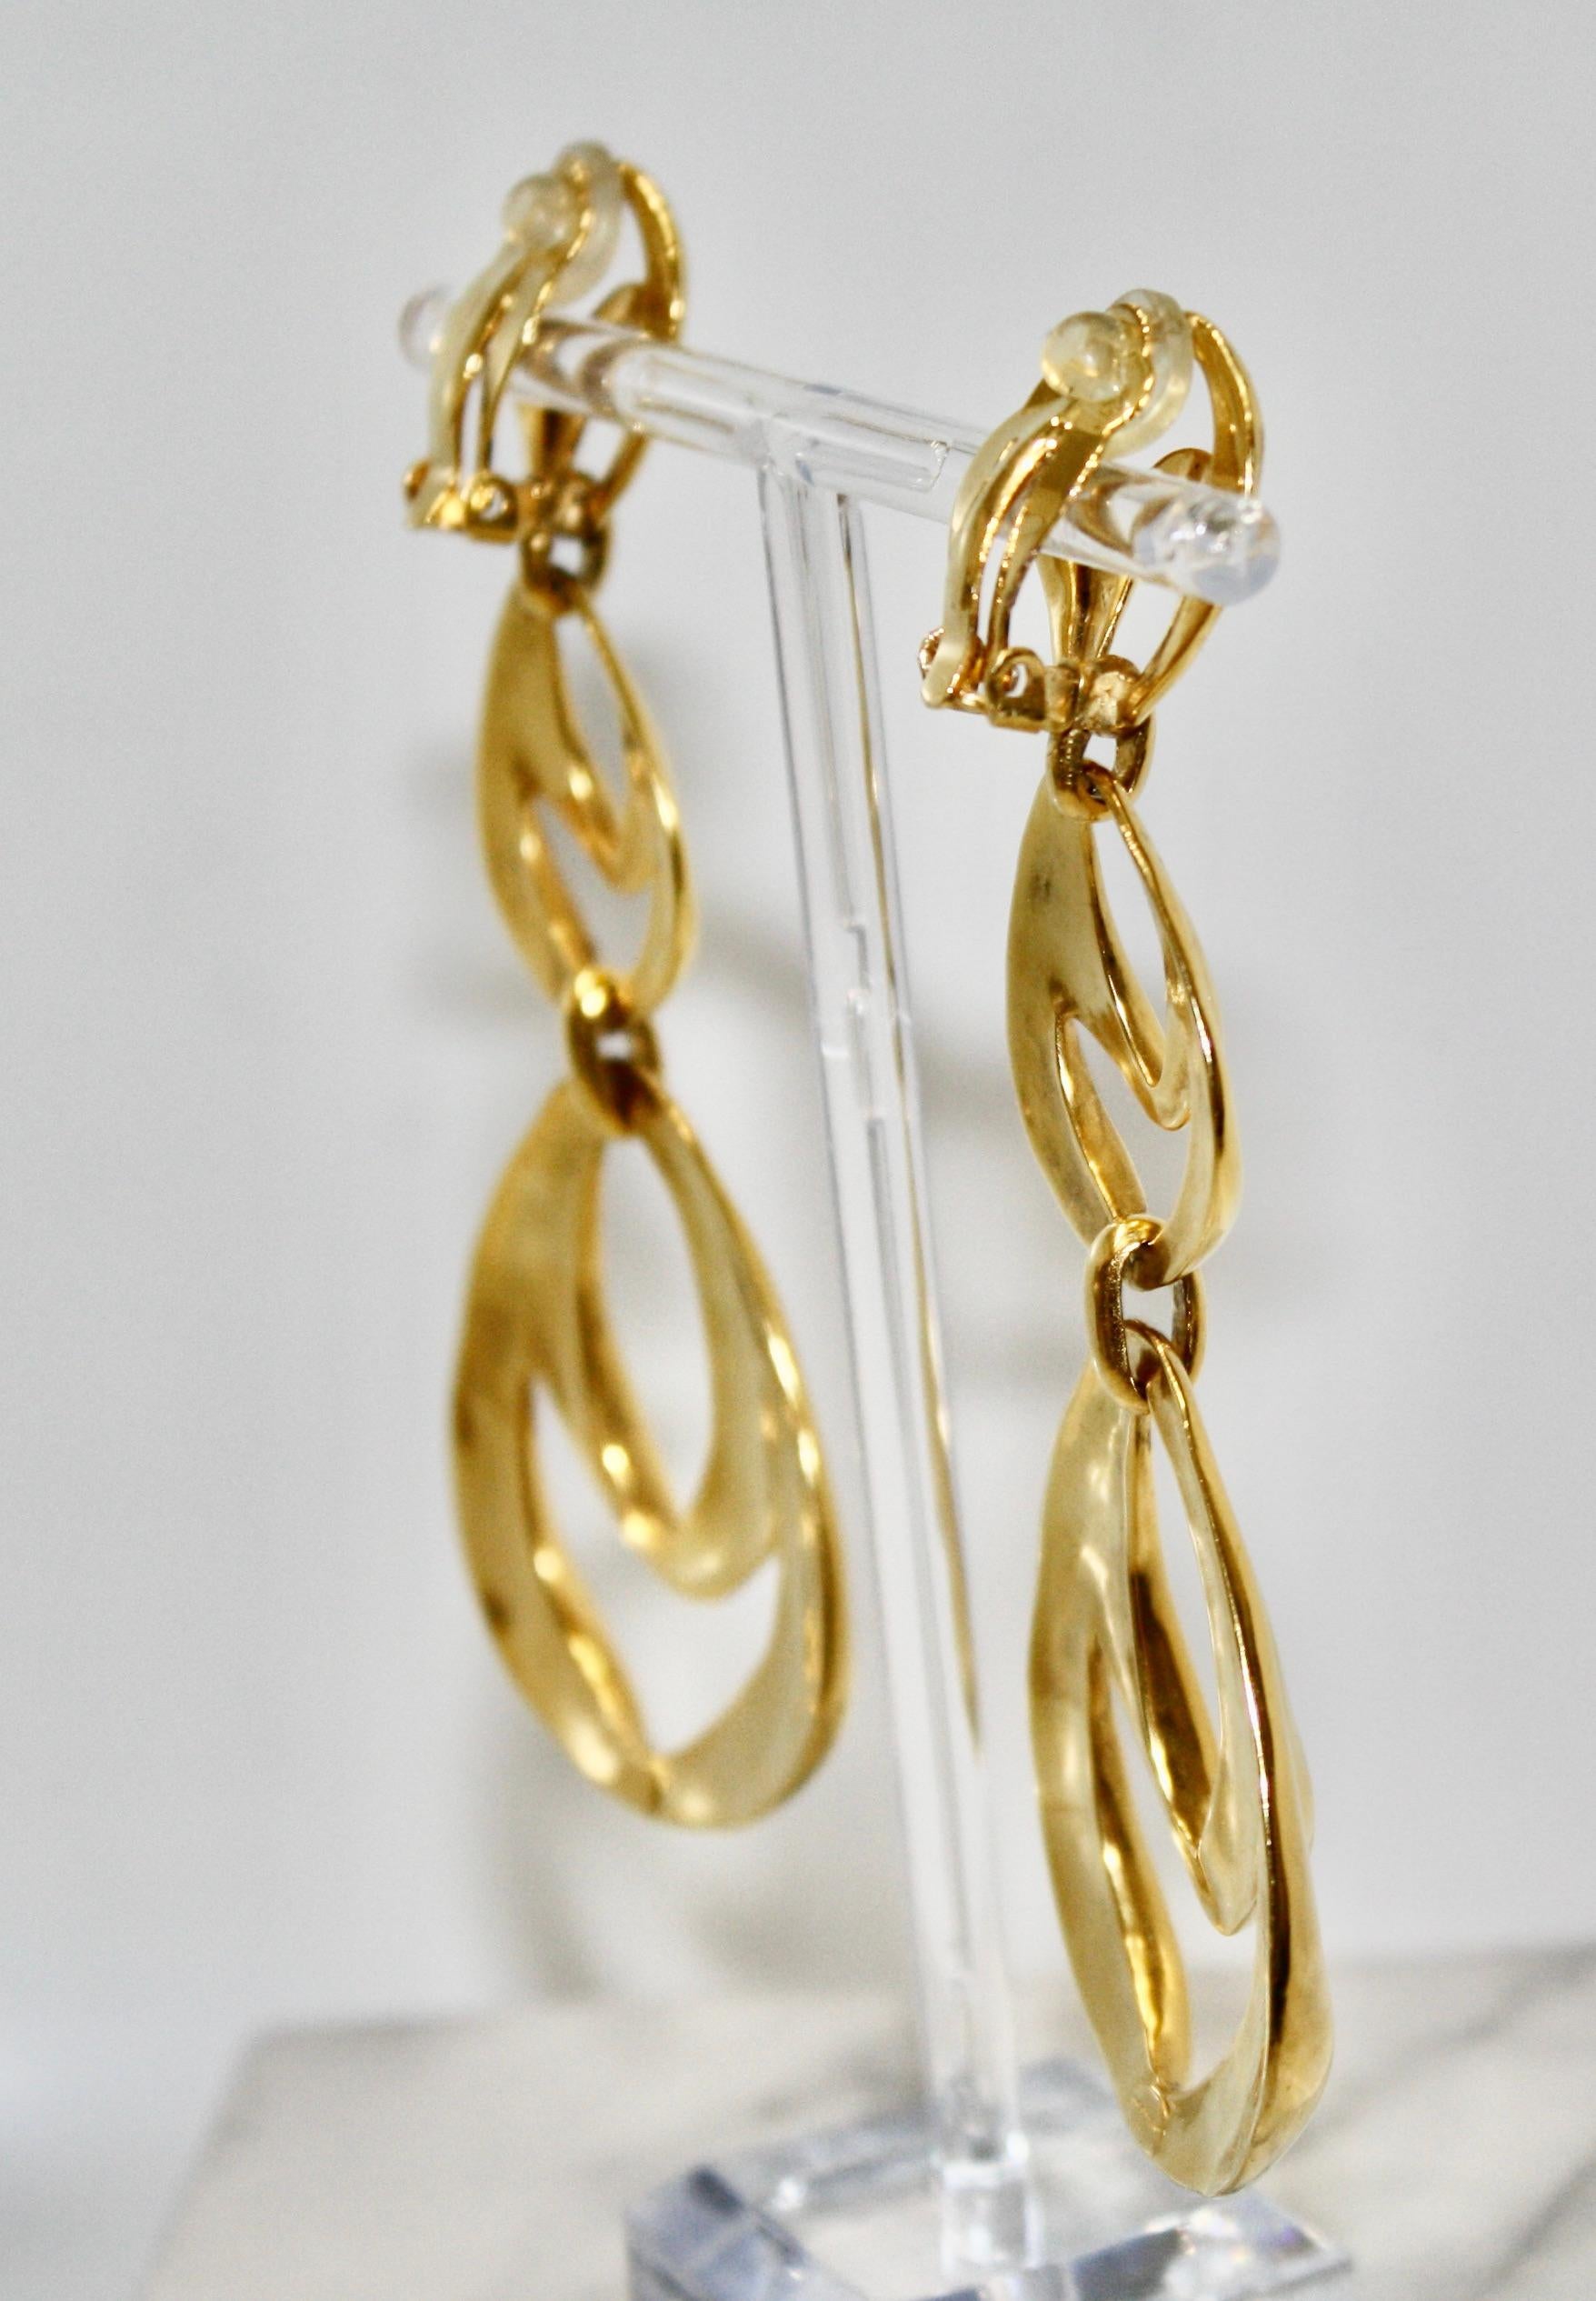 Clip earrings.Bronze dipped in  24-carat gold. Very chic and modern look from Goossens Paris.
Signature on the bottom loop.
Each piece of jewellery made by the House of Goossens is anchored in a heritage, a savoir-faire and a style. In the image of